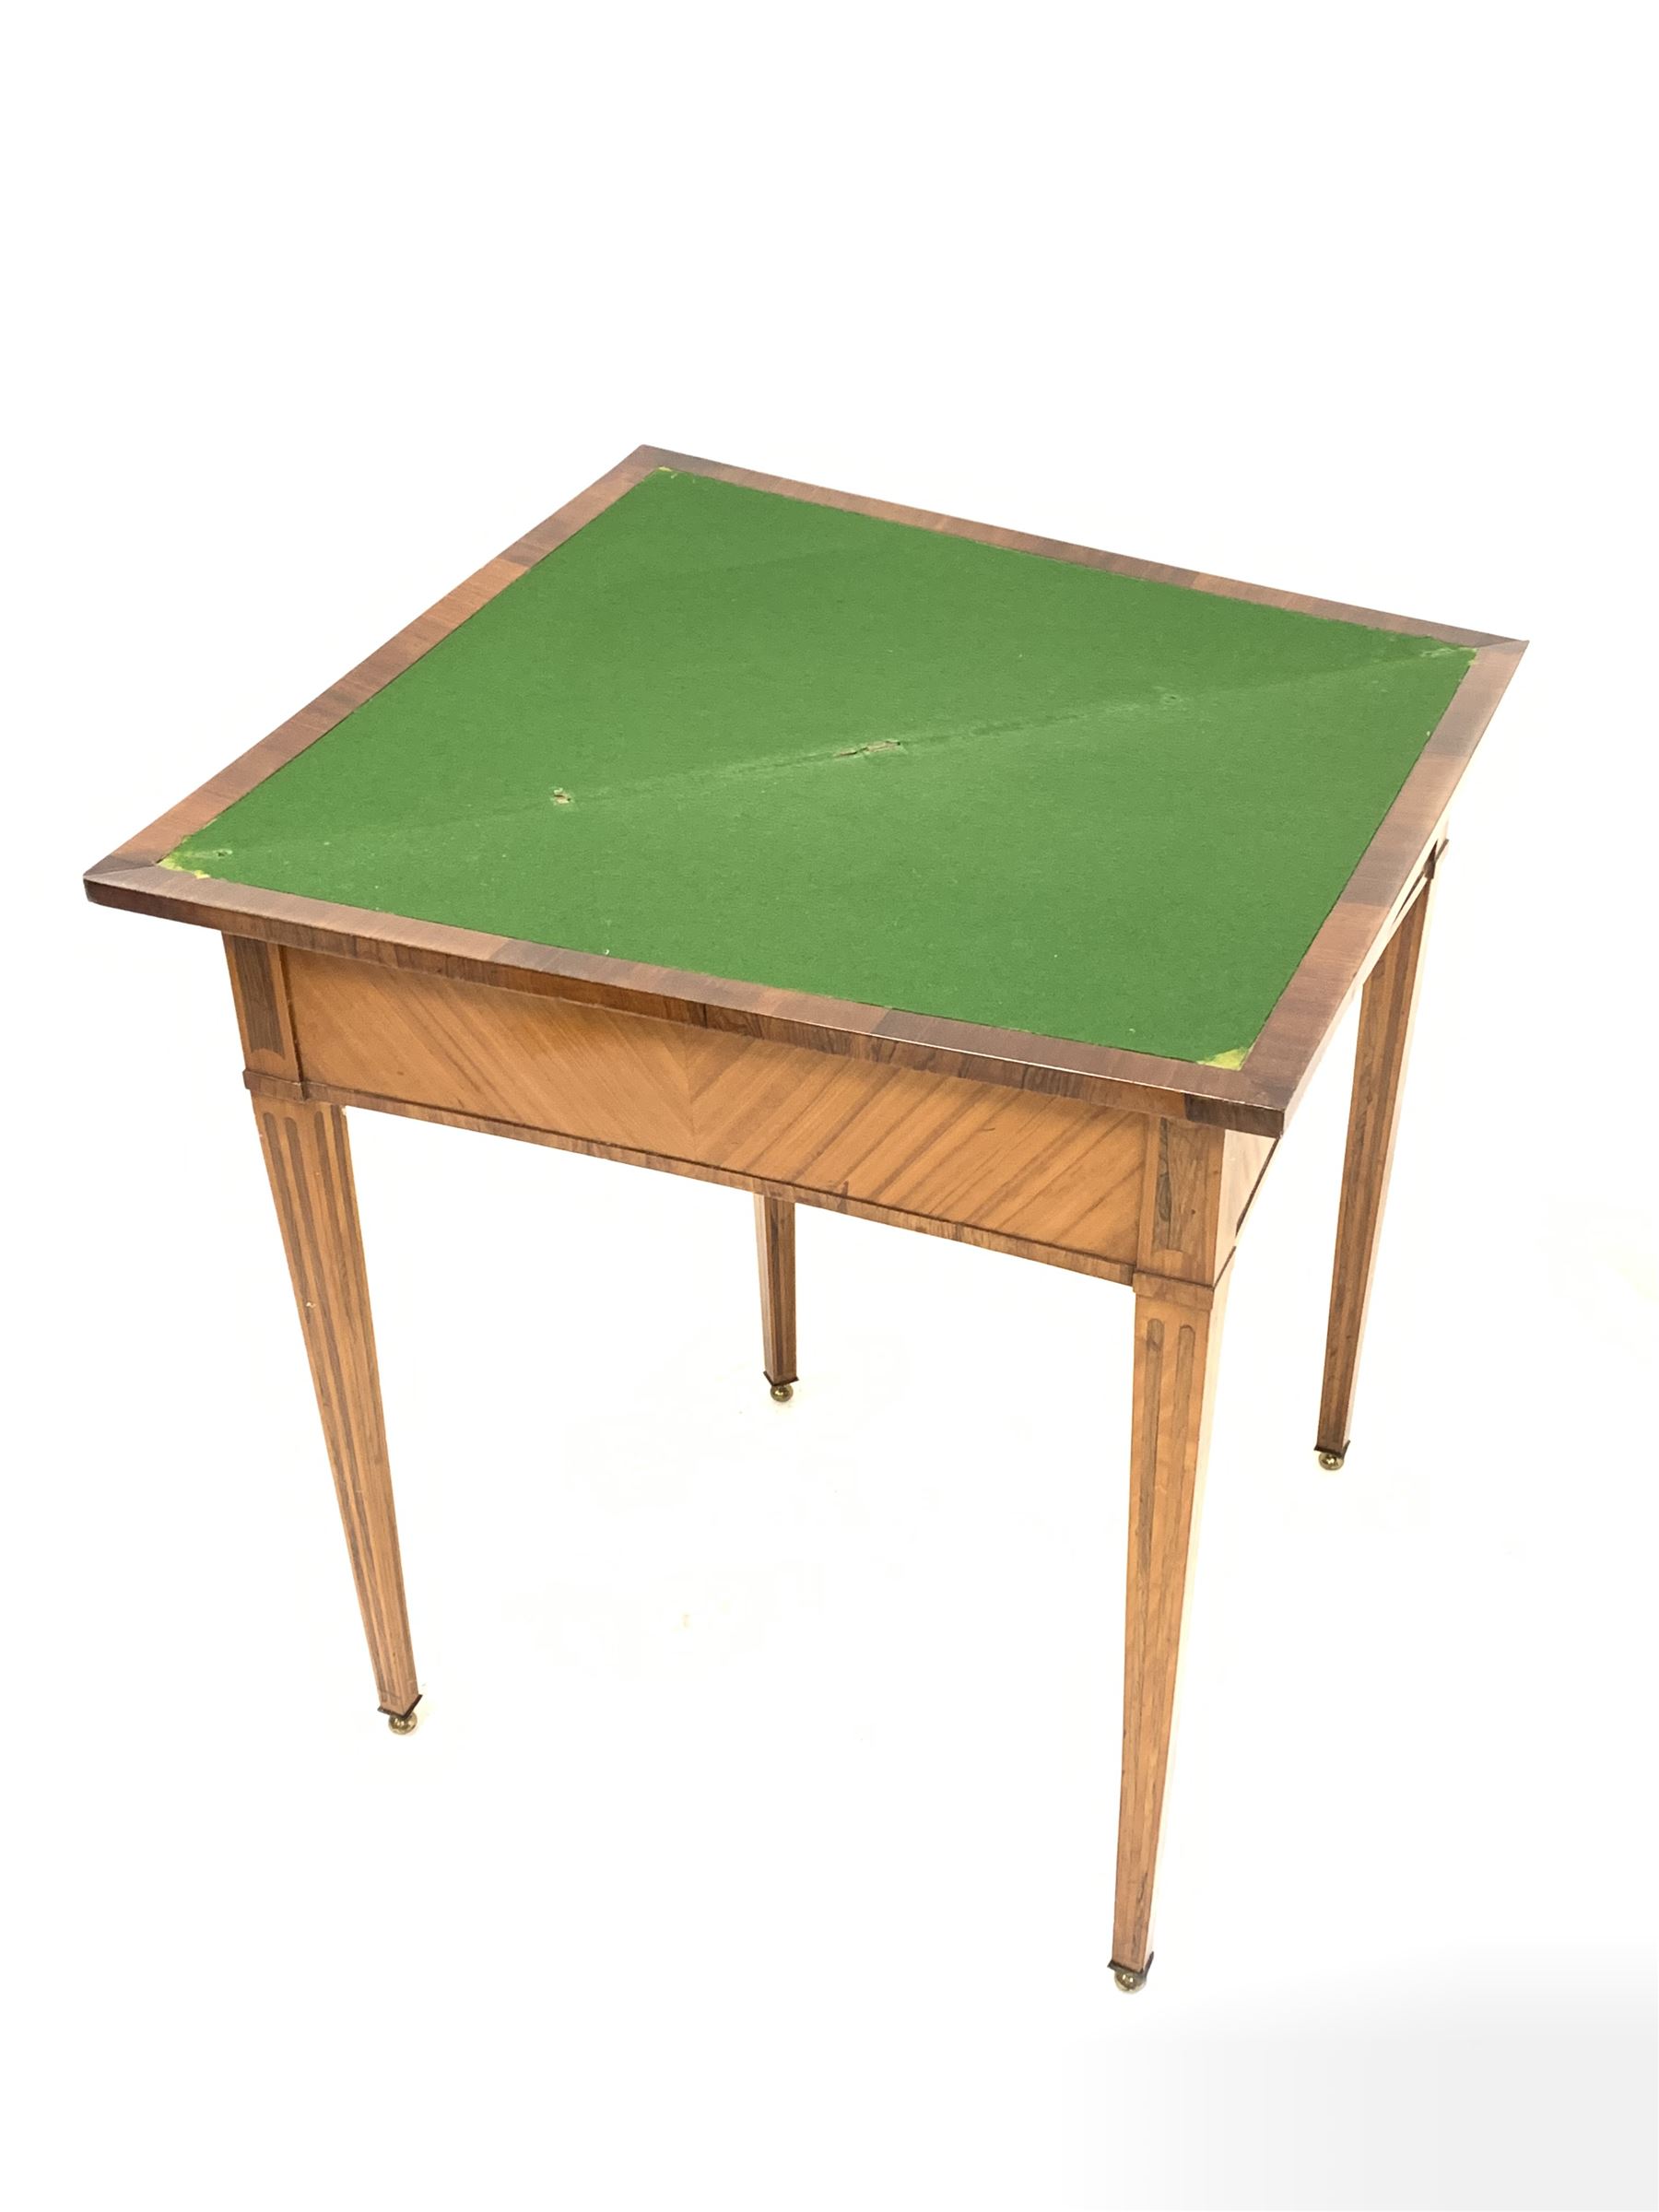 Crossbanded satinwood card table of triangular form with baize lined interior on square tapering sup - Image 4 of 6